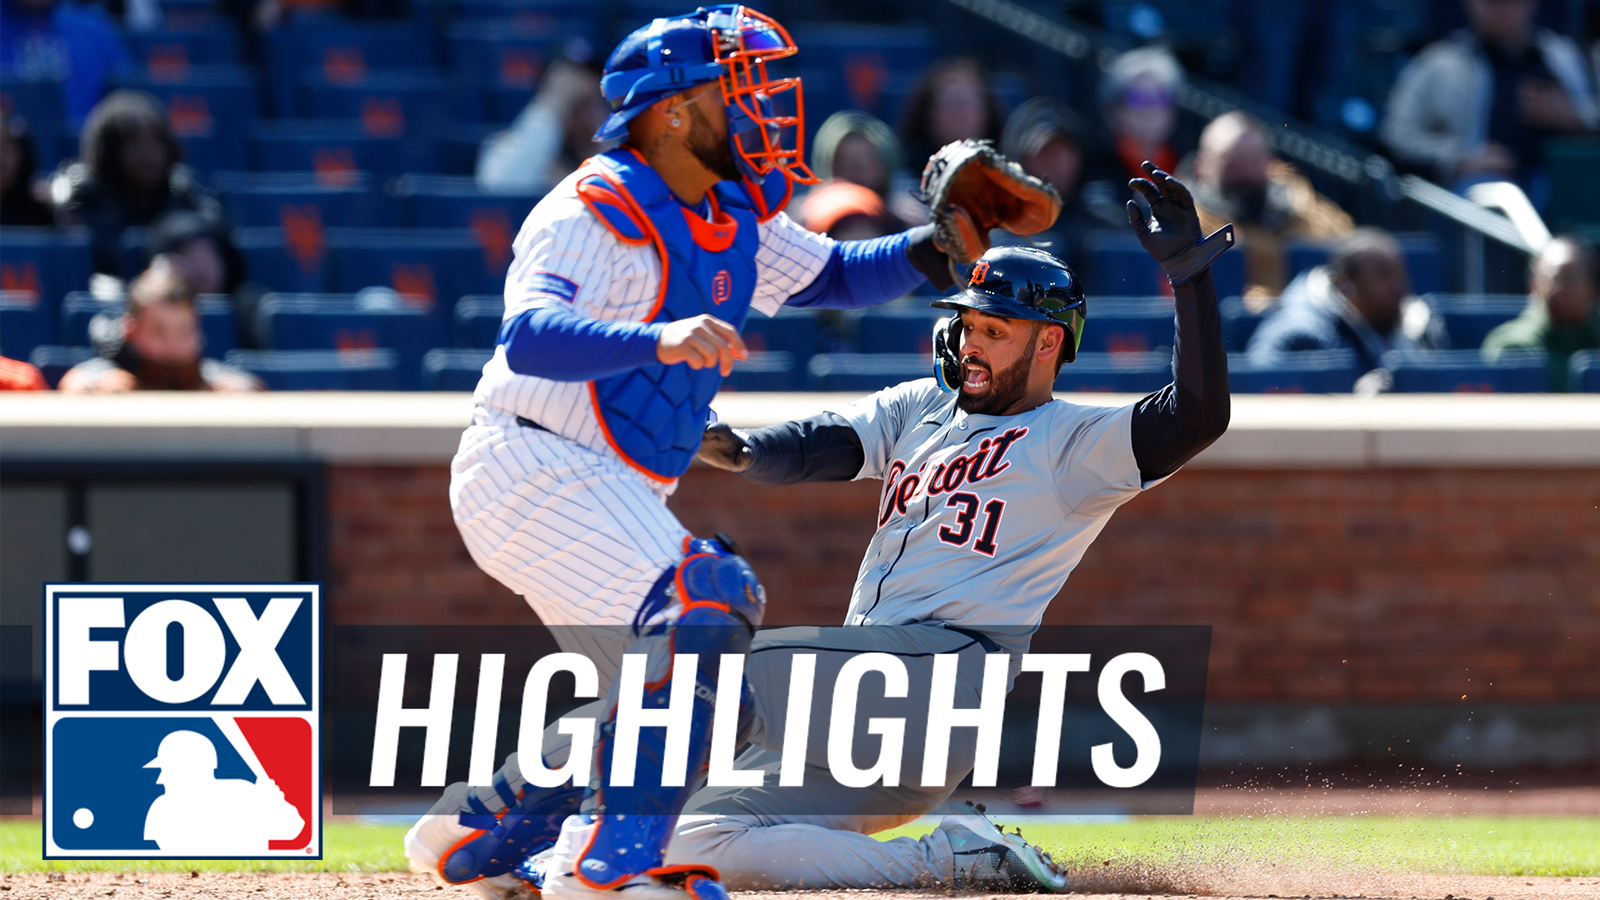 Detroit Tigers vs. New York Mets Game 1 Highlights